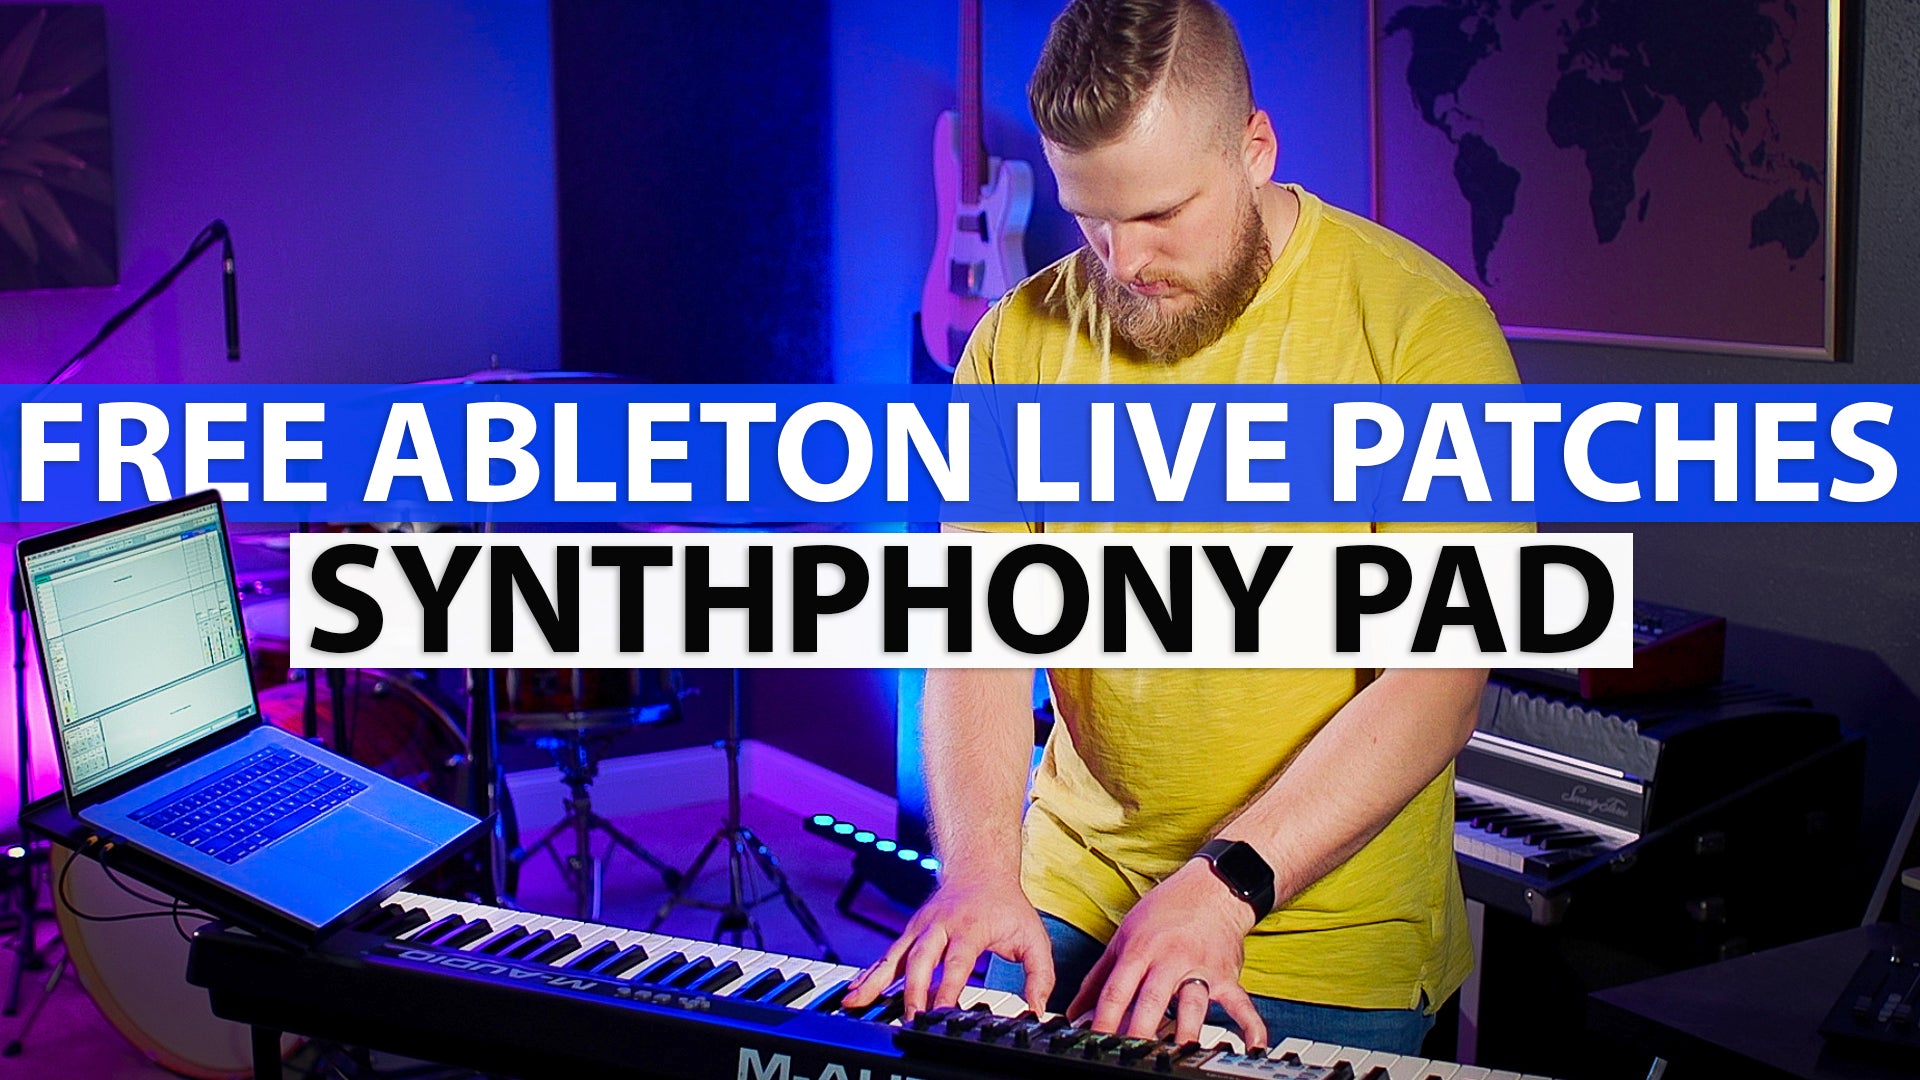 Ableton Worship Patch! - Synthphony Pad